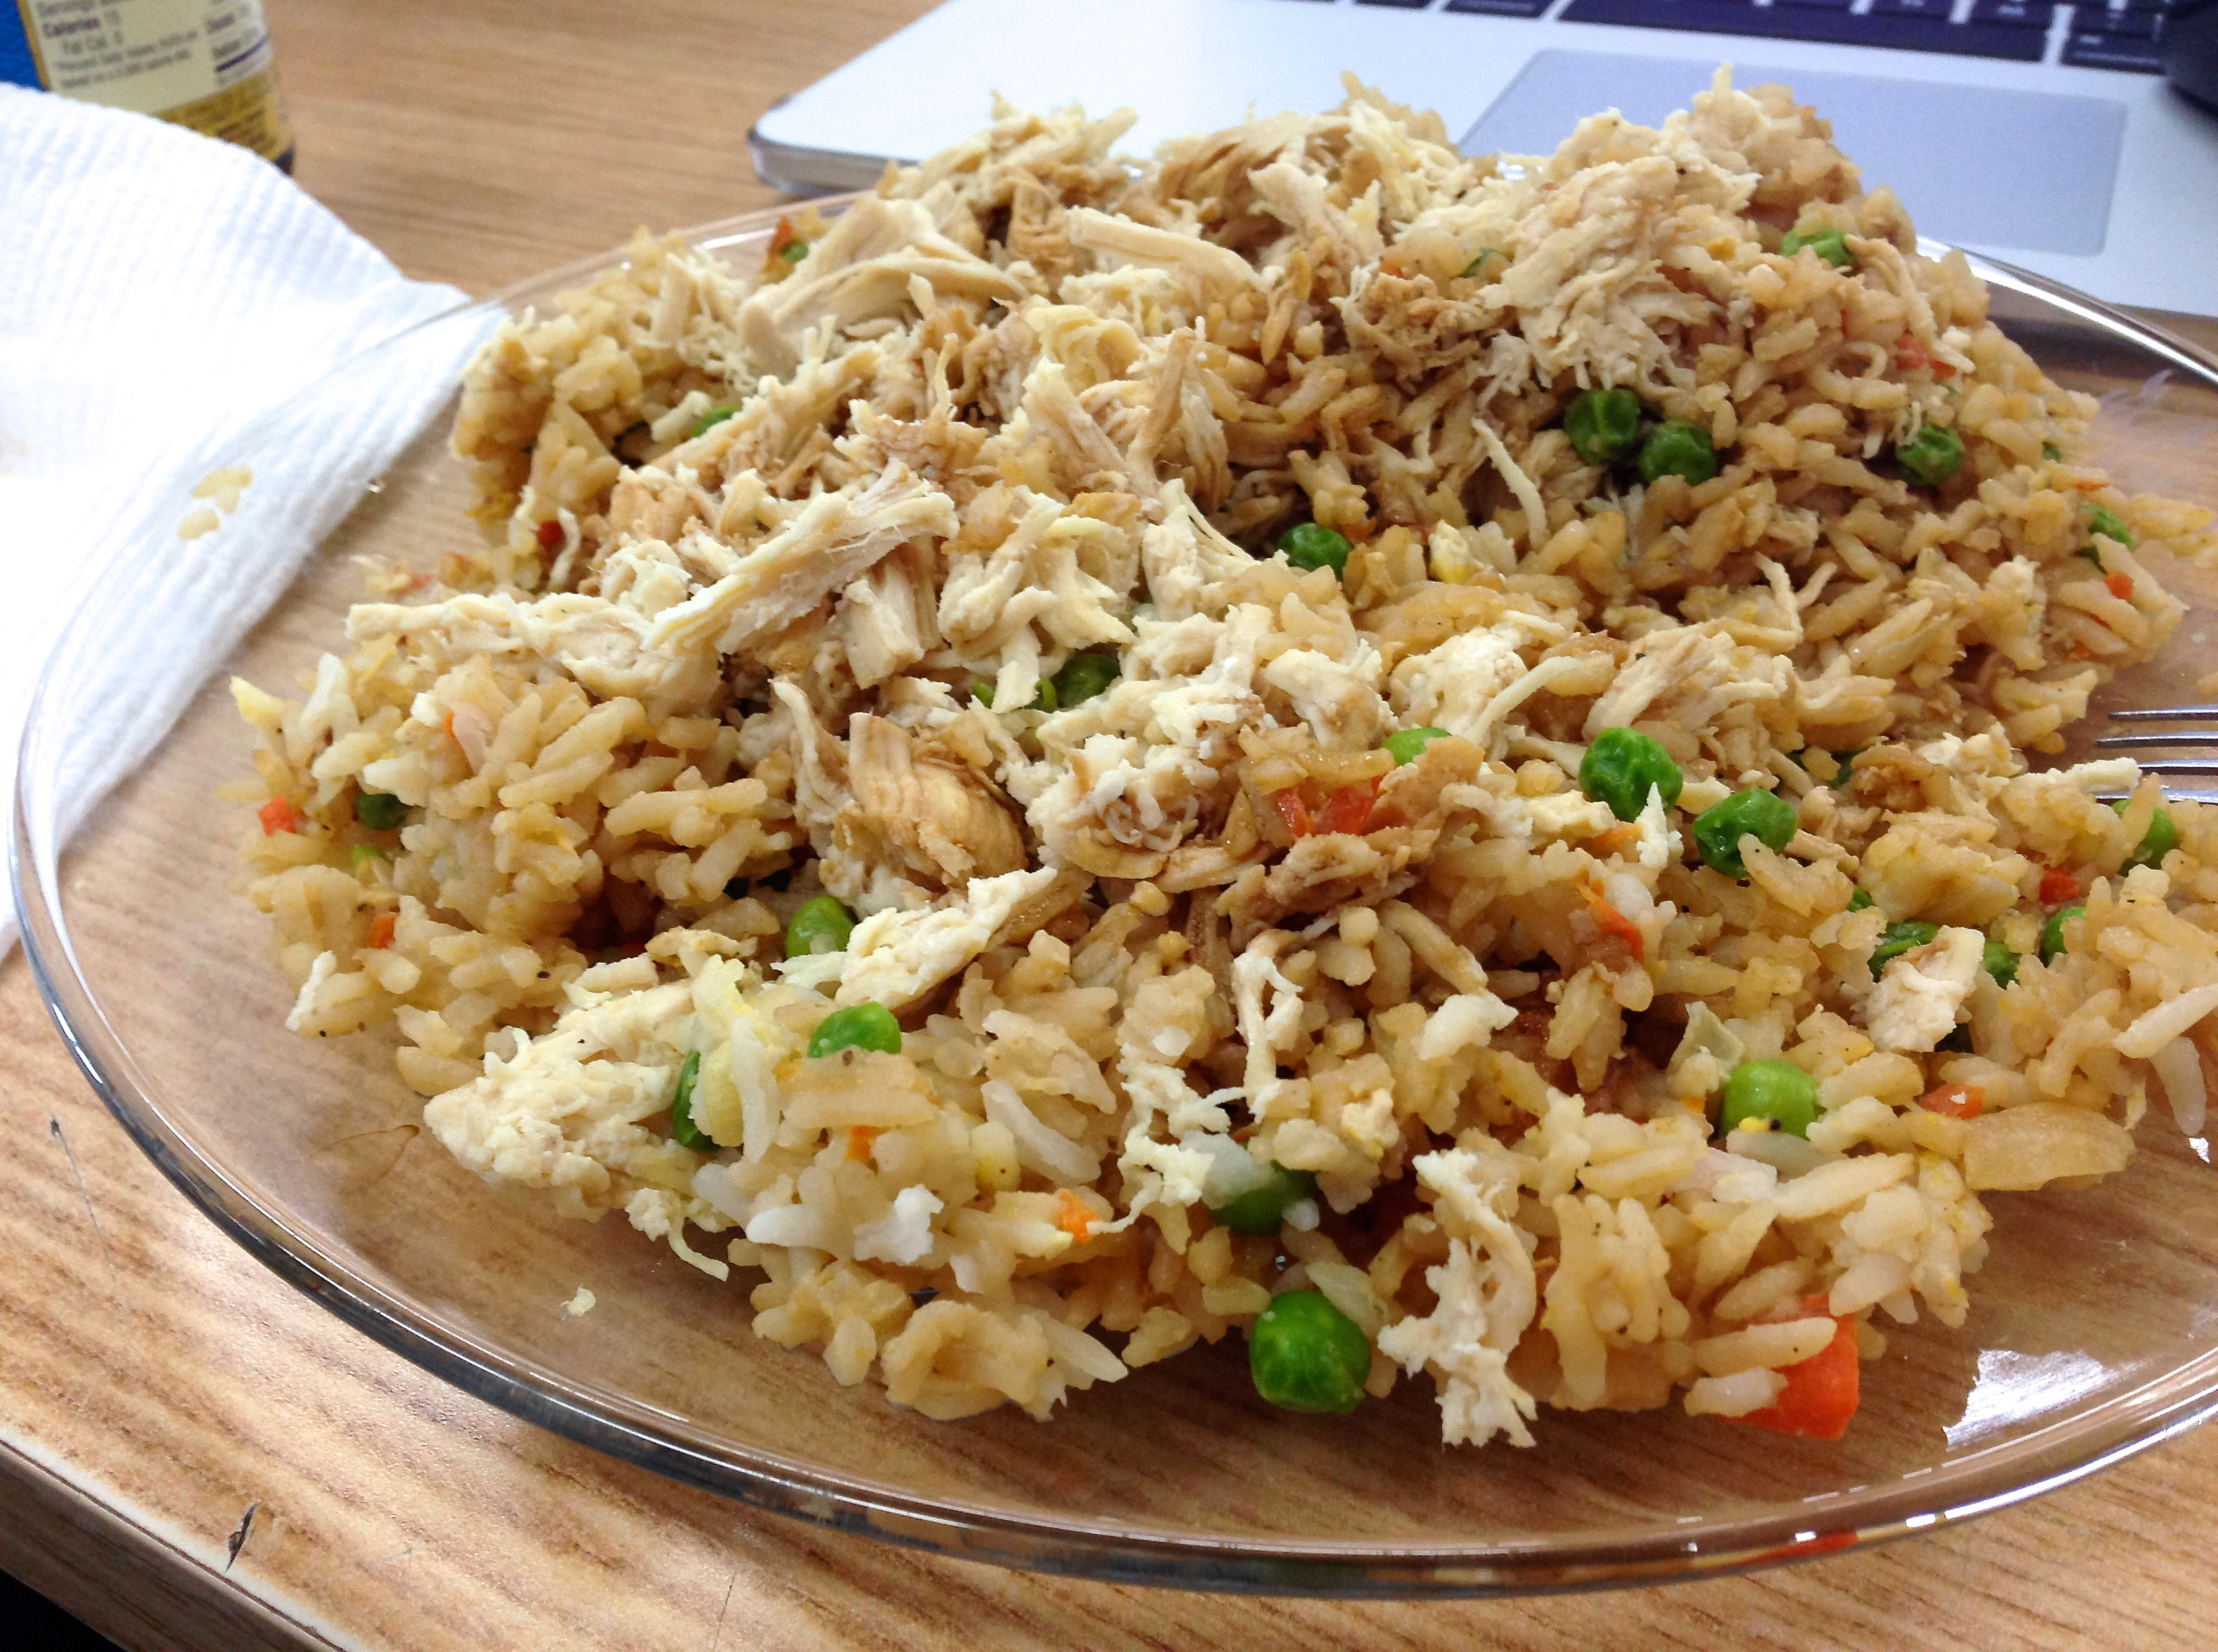 Pork Fried Rice Calories
 chicken fried rice calories